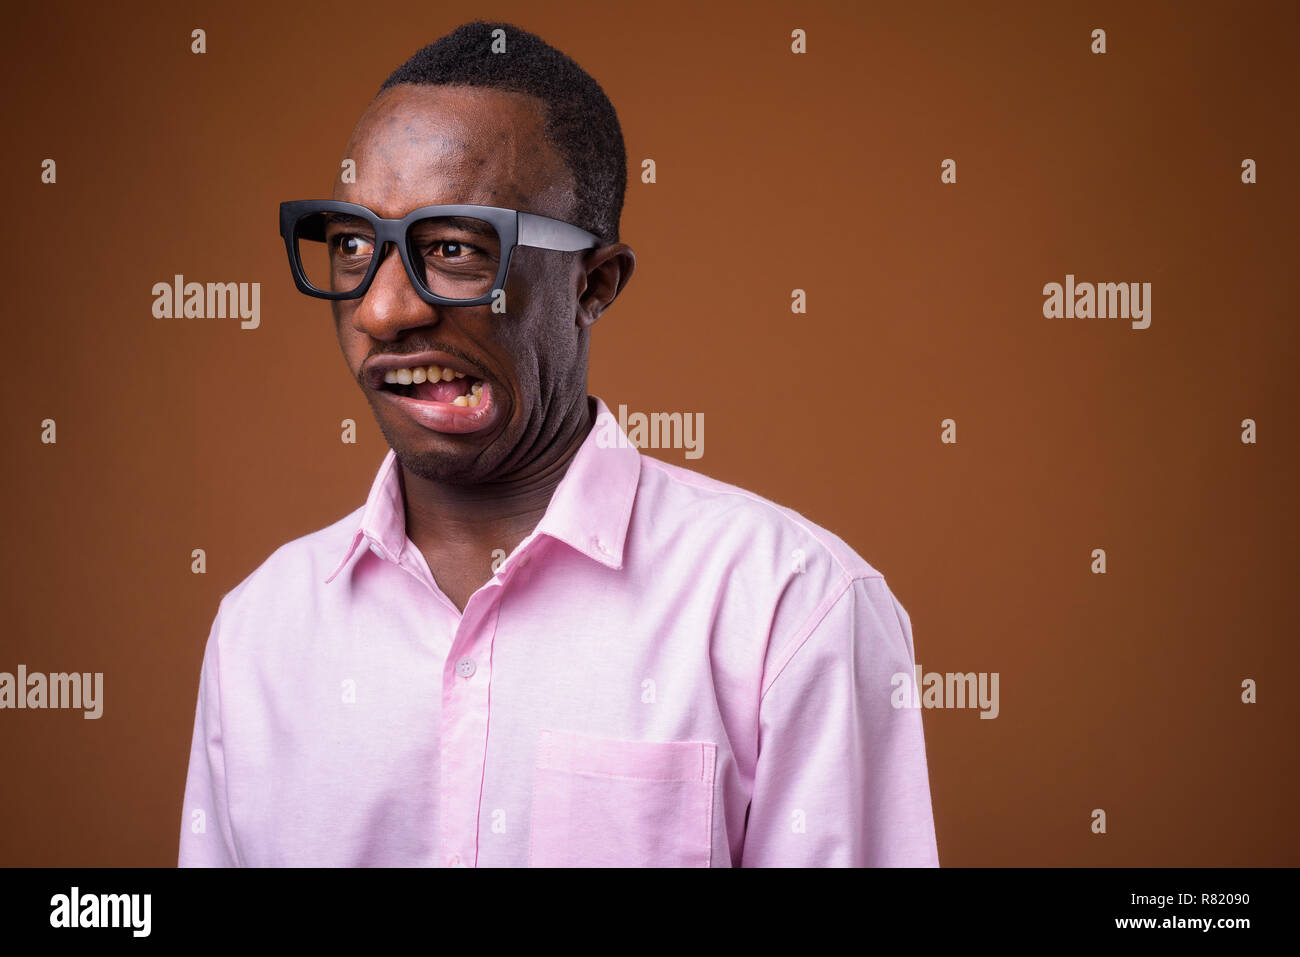 Portrait of young African businessman making faces against brown background Stock Photo